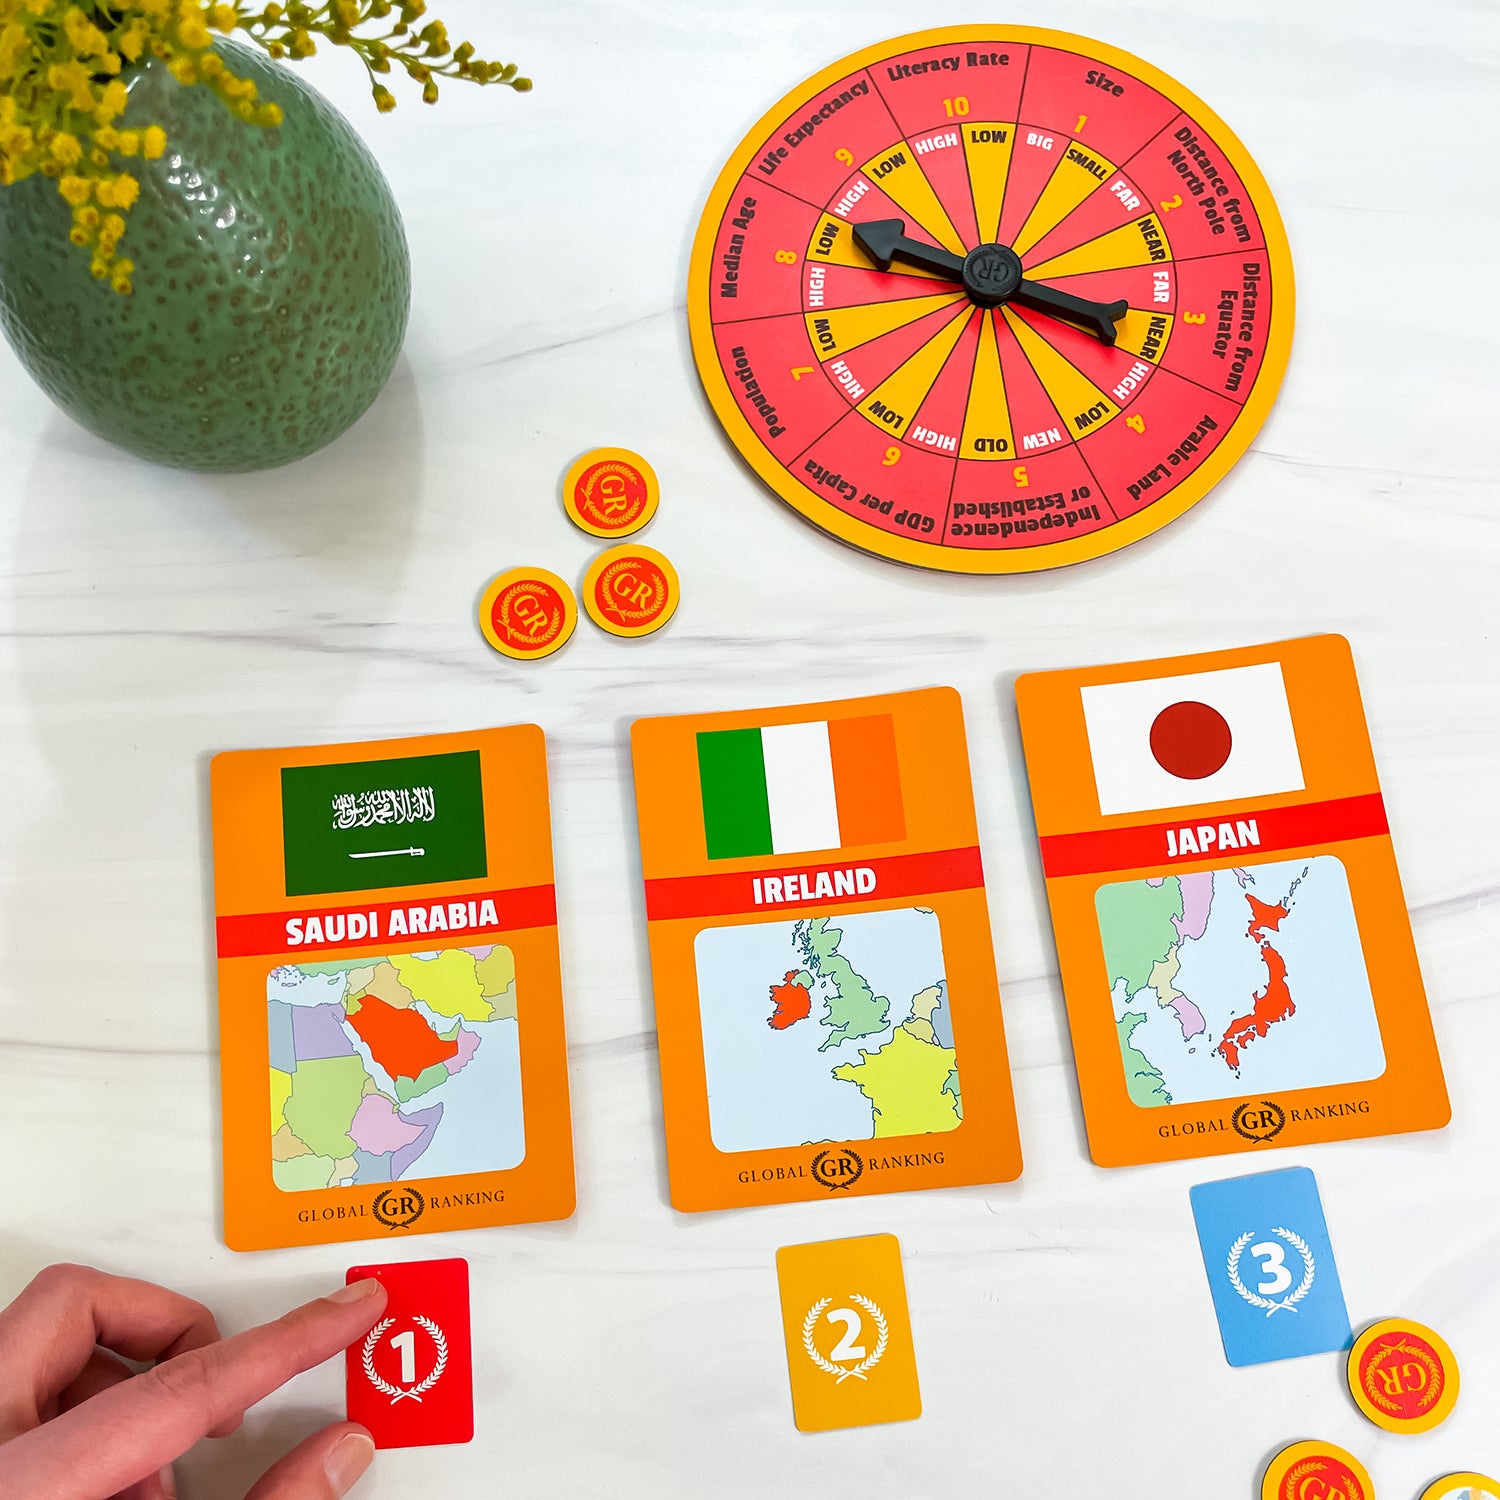 Global Ranking by SimplyFun is a fun board game focusing on geography facts and demographics for ages 10 and up.